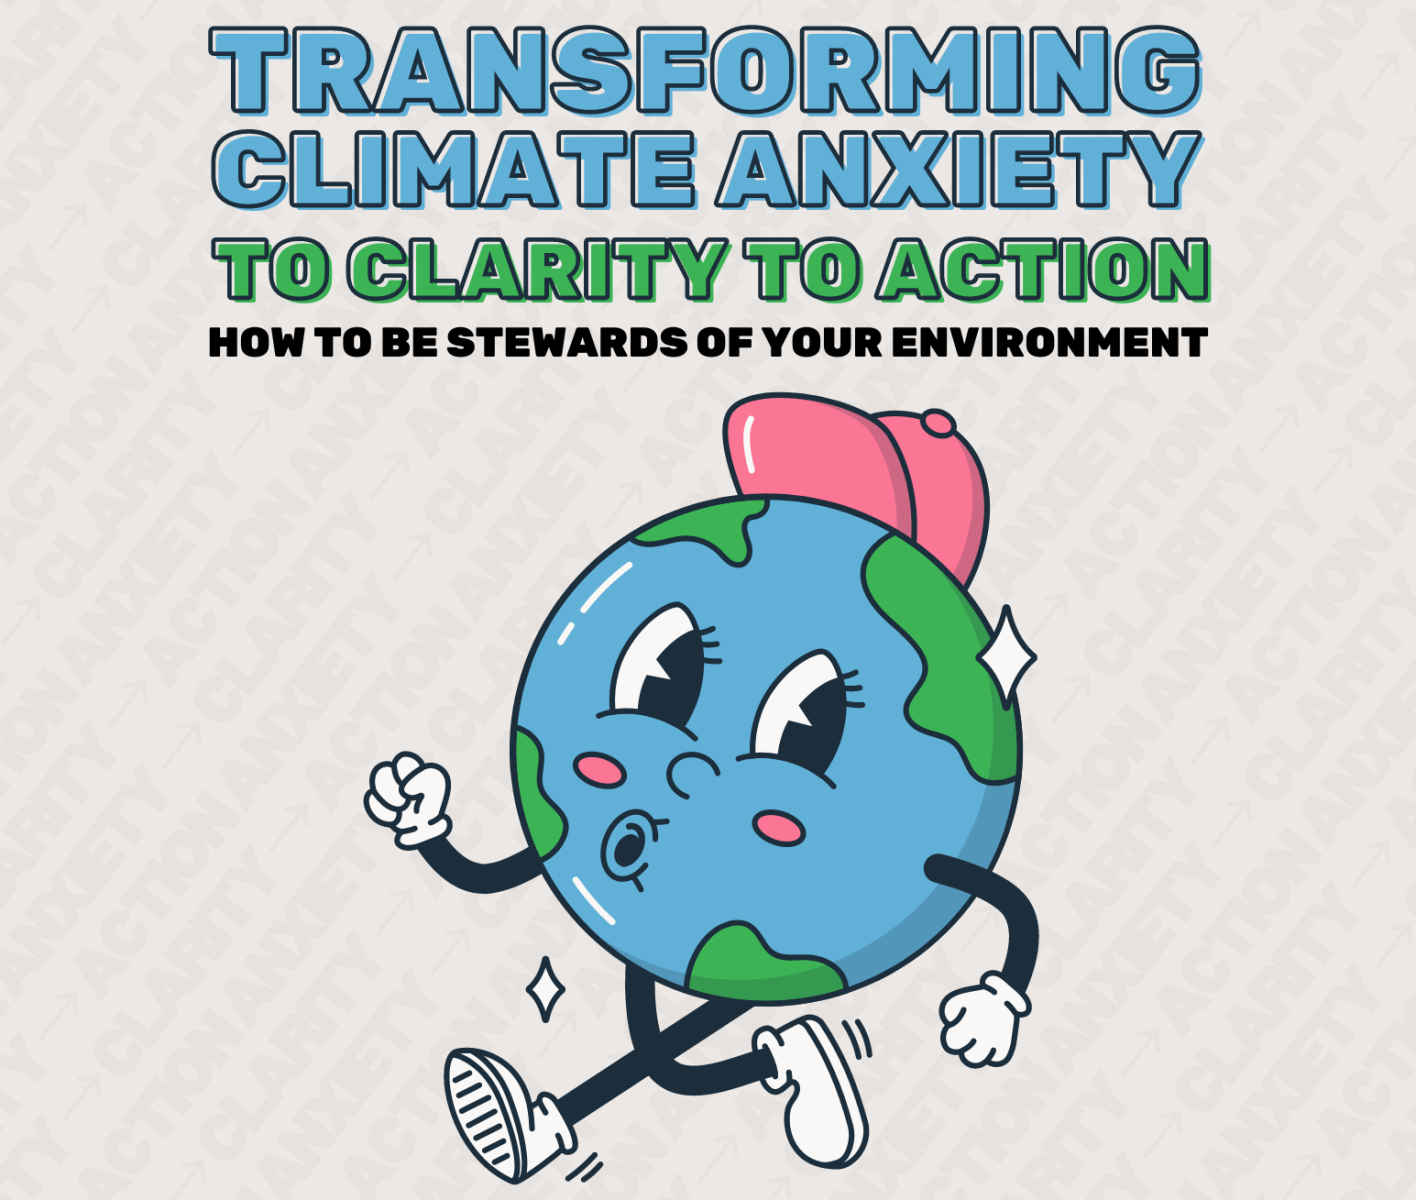 Transforming Climate Anxiety flier (with image of a cartoon globe with a face whistling)